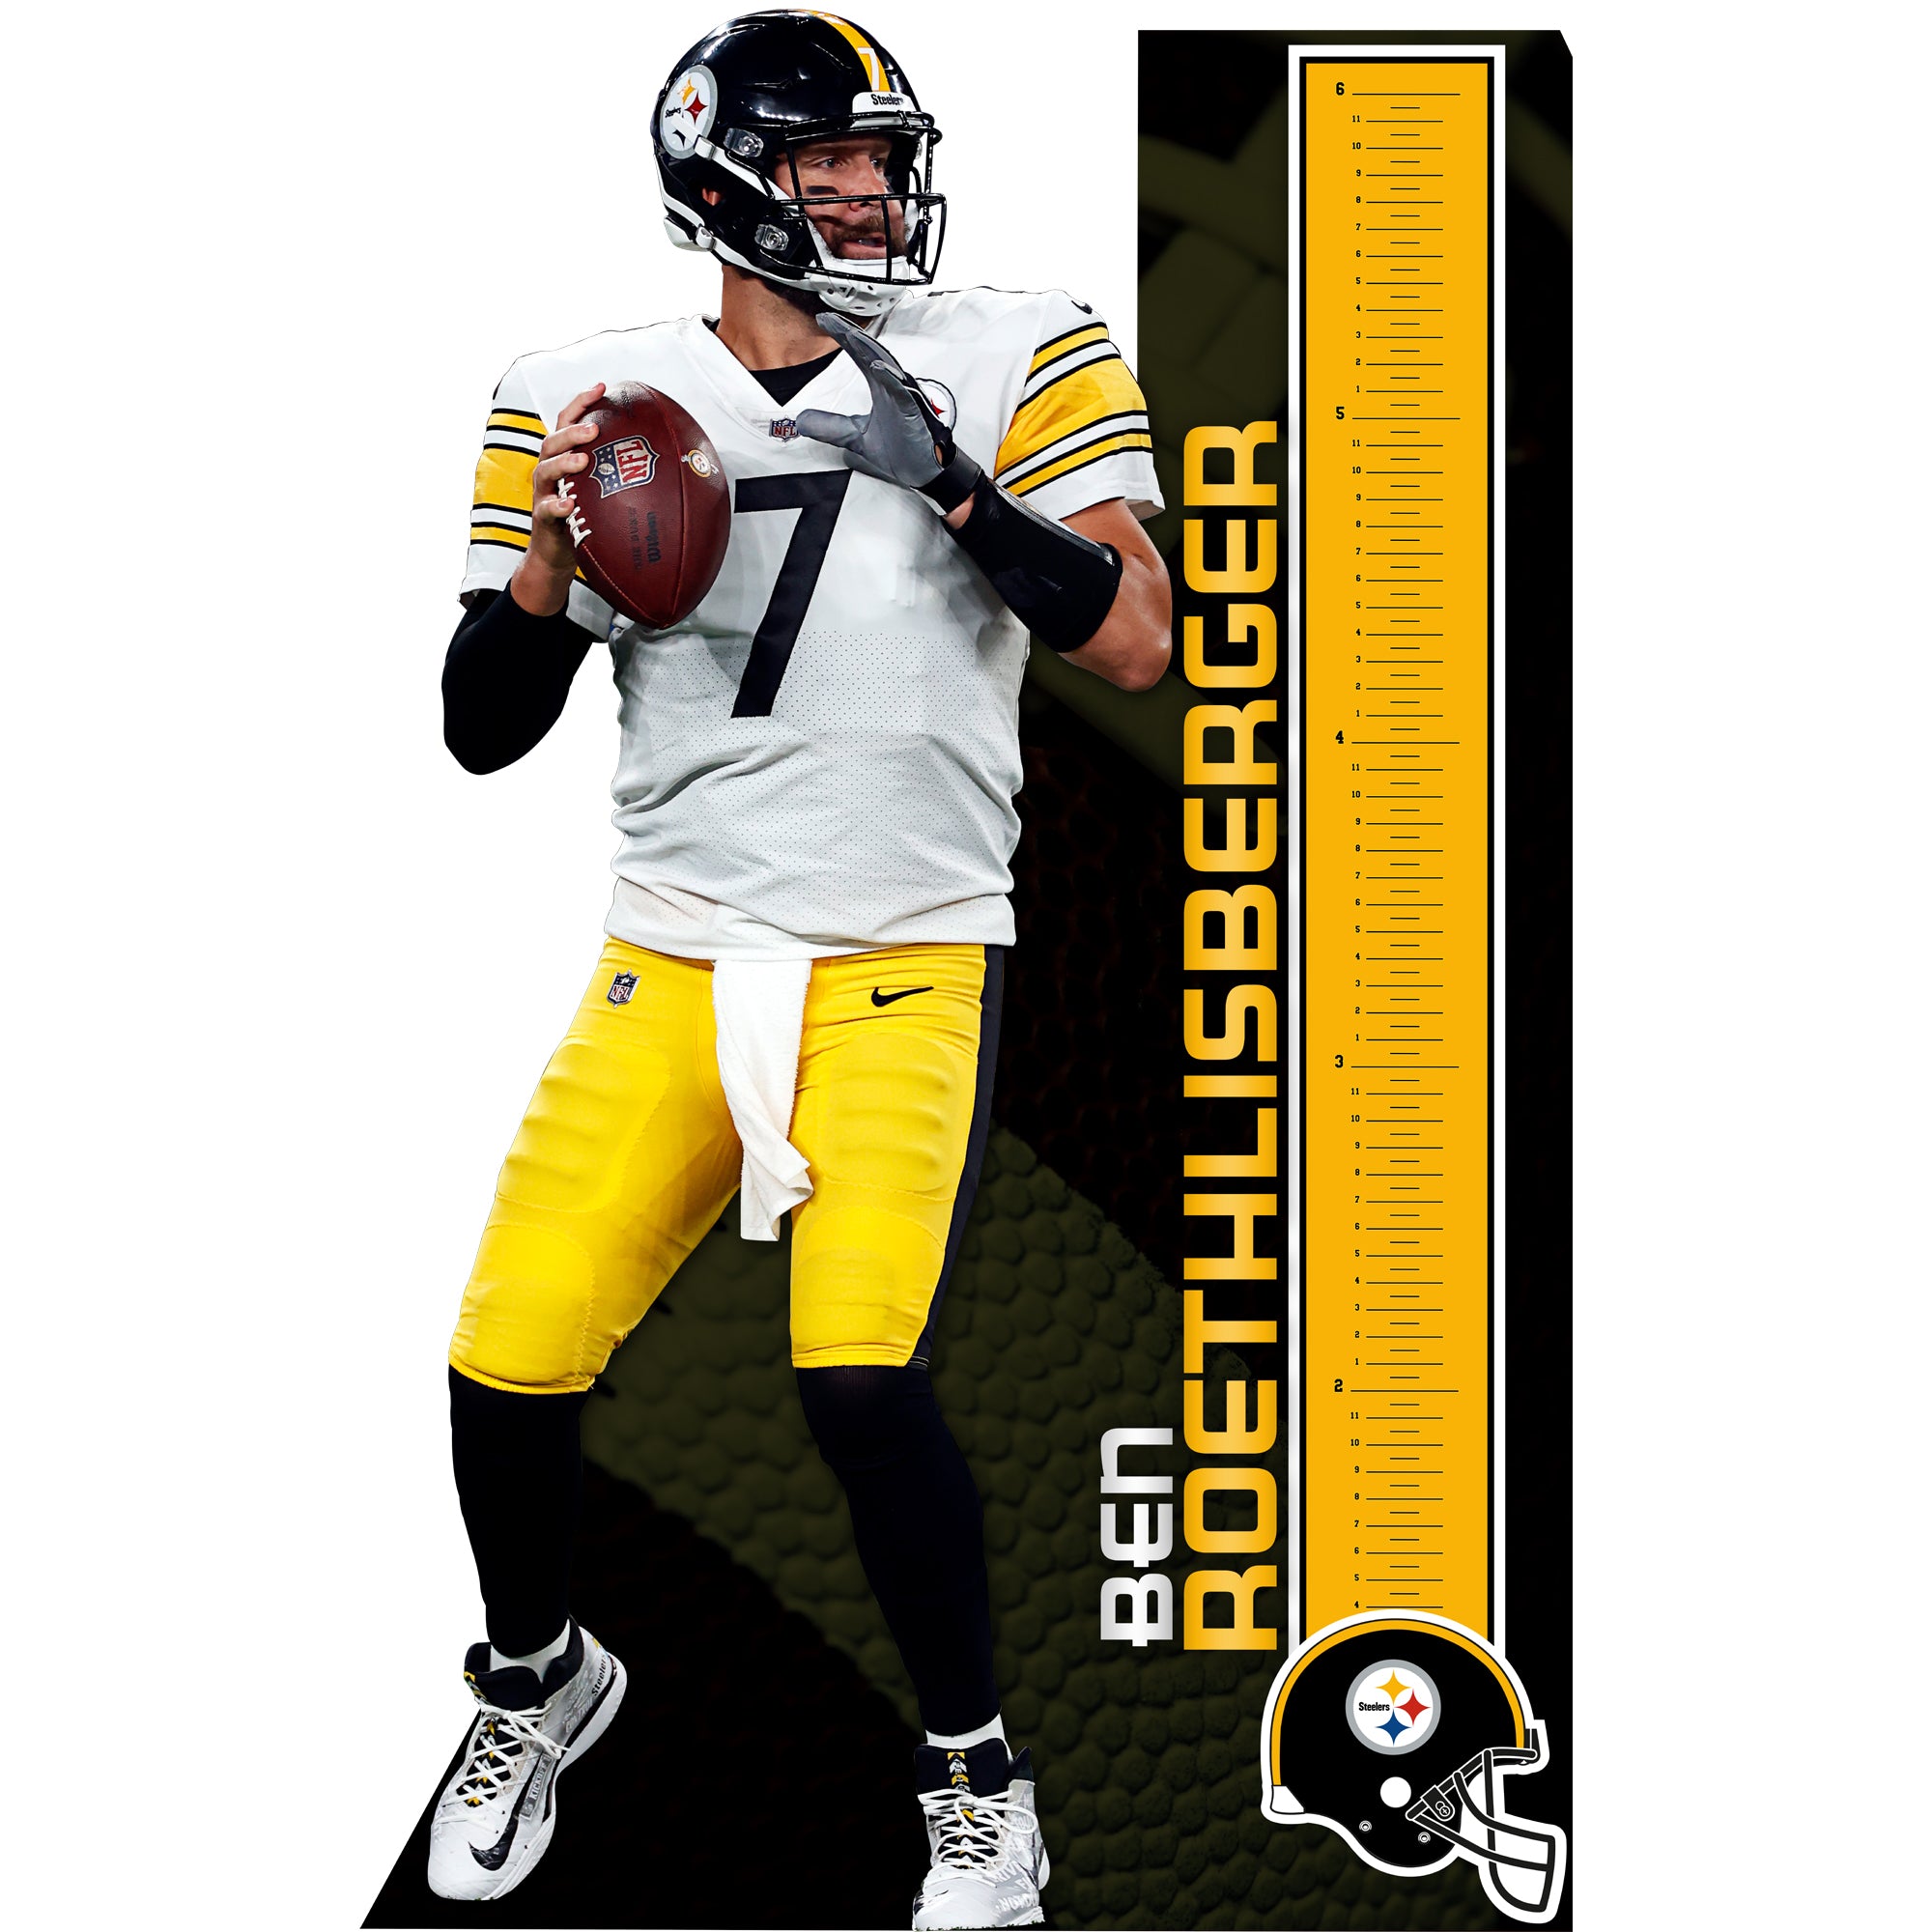 Ben Roethlisberger 2020 Growth Chart - NFL Removable Wall Decal Growth Chart 45W x 71H